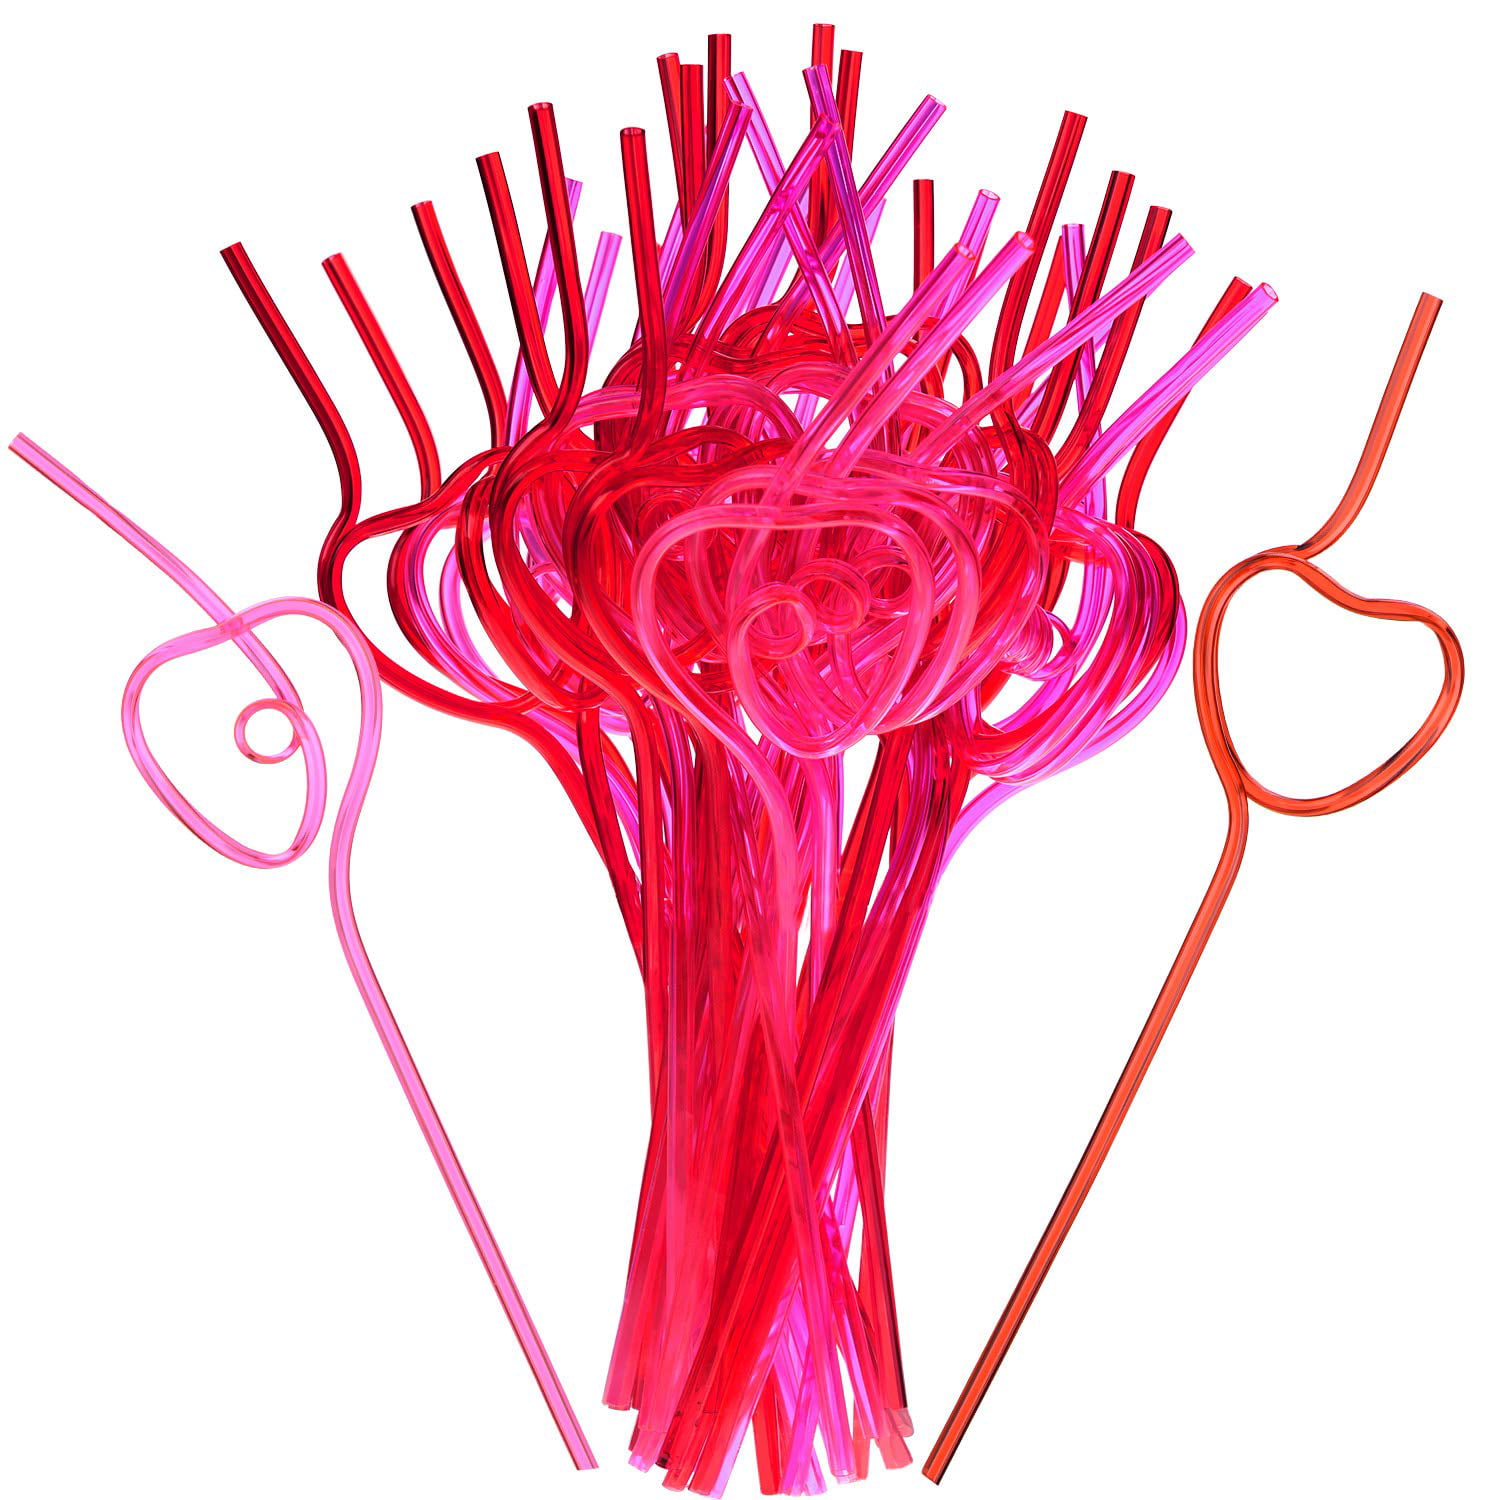  24 Pieces Valentine's Day Heart Shaped Straws Reusable Crazy  Loop Straws Valentine Theme Party Plastic Drinking Straws for Valentine's  Day Birthday Wedding Party Favors Decorations Supplies, 6 Styles : Health &  Household